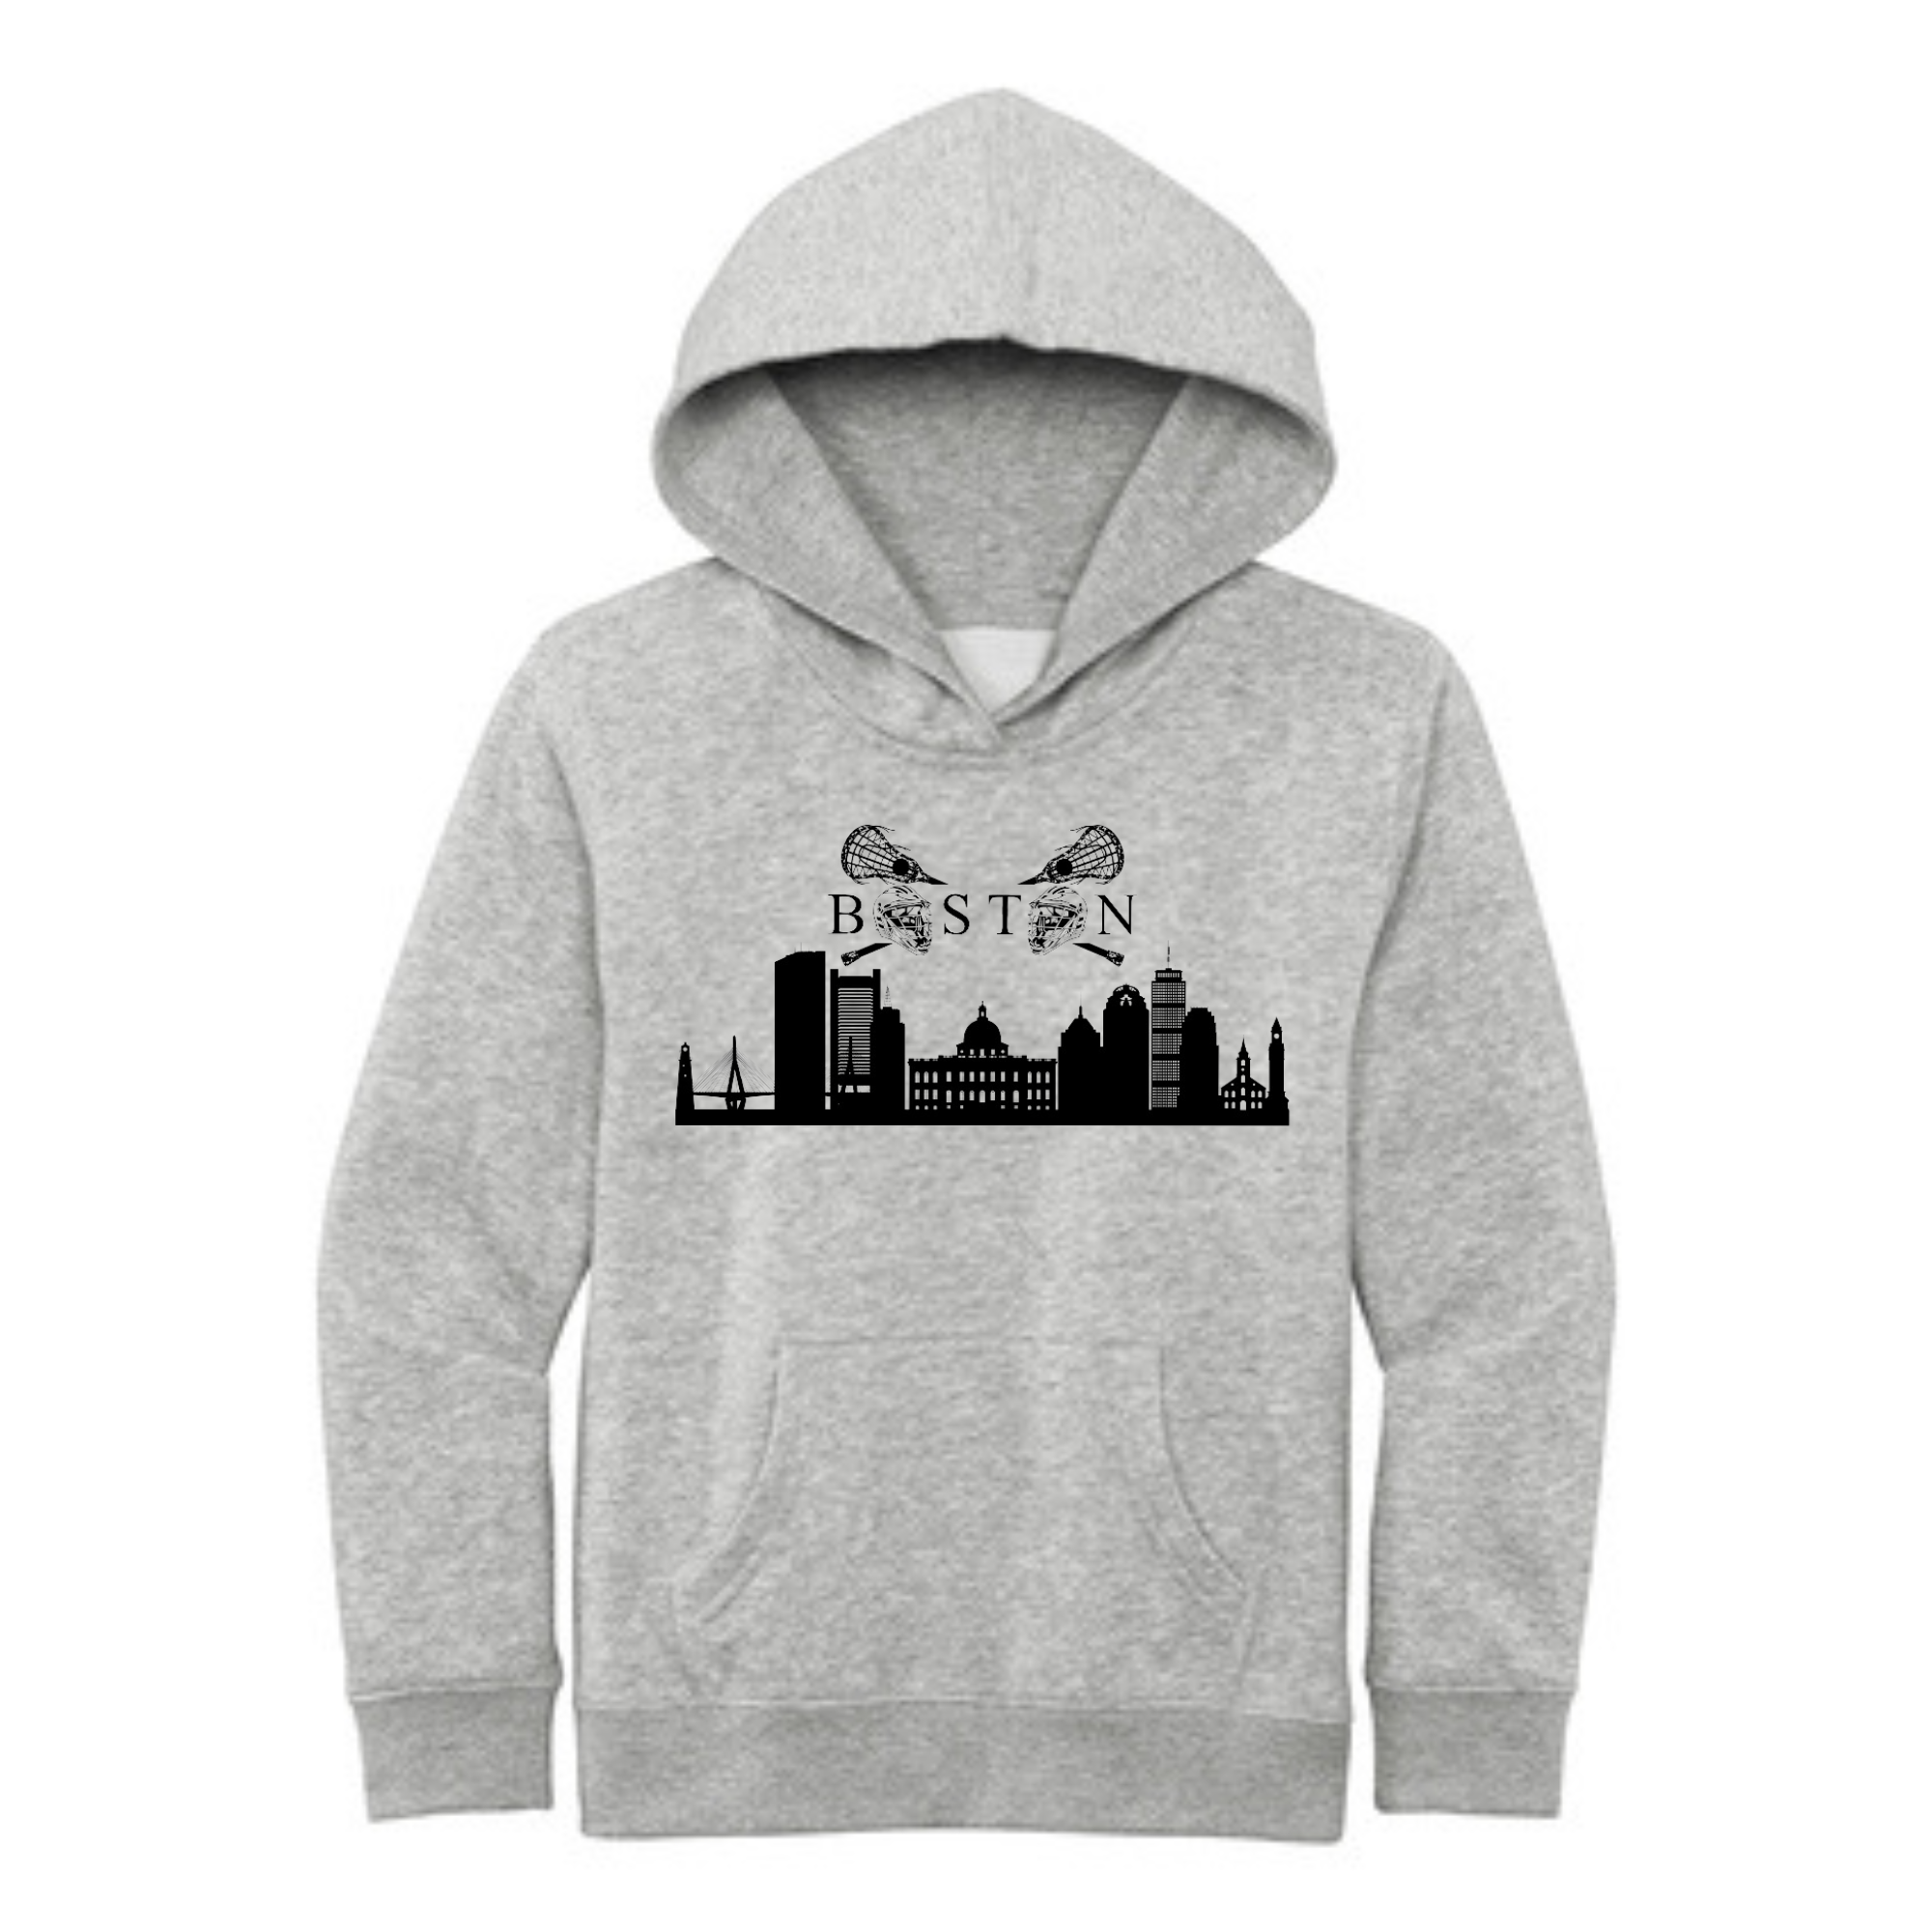 TUNEUP TOURNAMENT BOSTON LACROSSE YOUTH HOODIE - GRAY